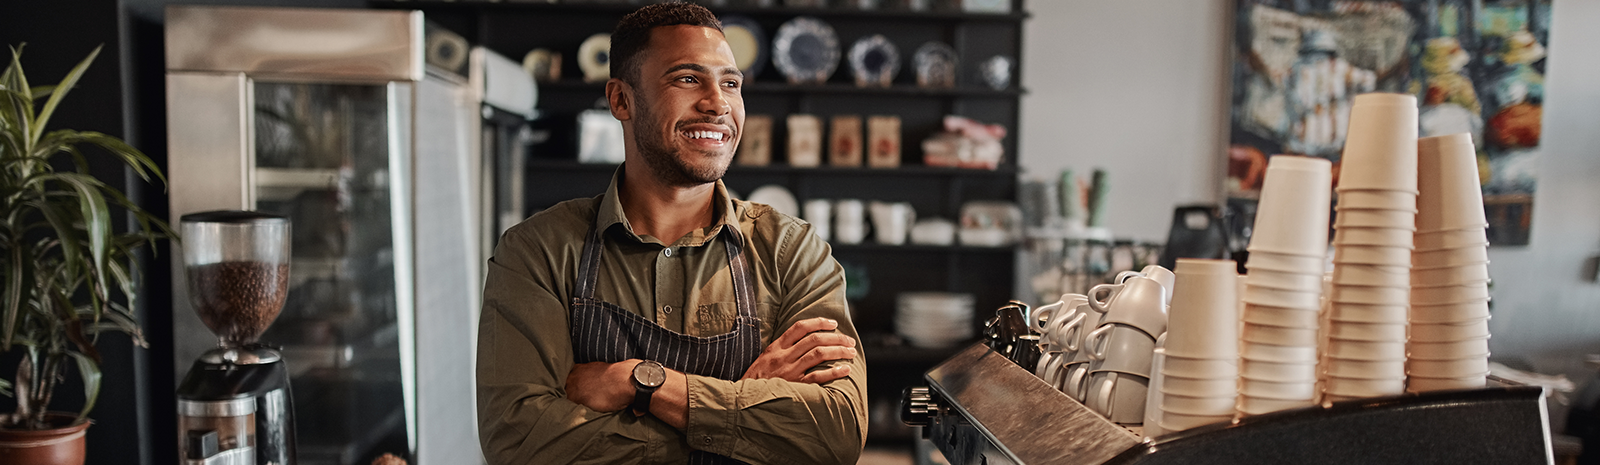 Business Owner in Coffee Shop smiling